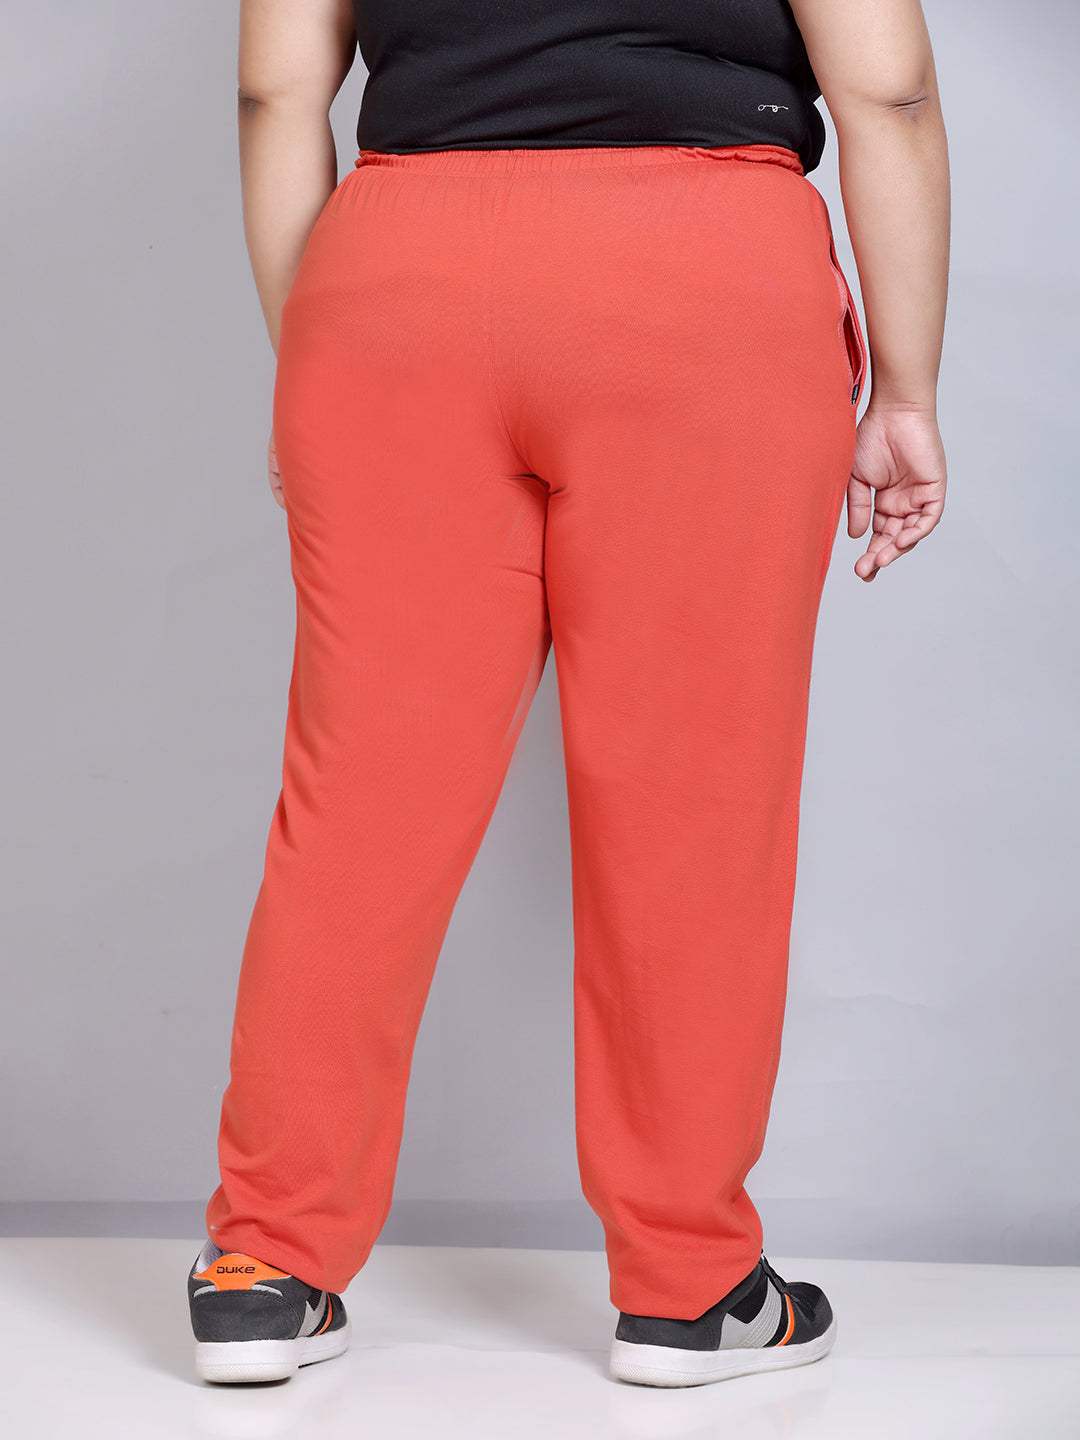 Grey Cotton Pants For Women PSW-4690 | Plus Size Clothing in Pakistan